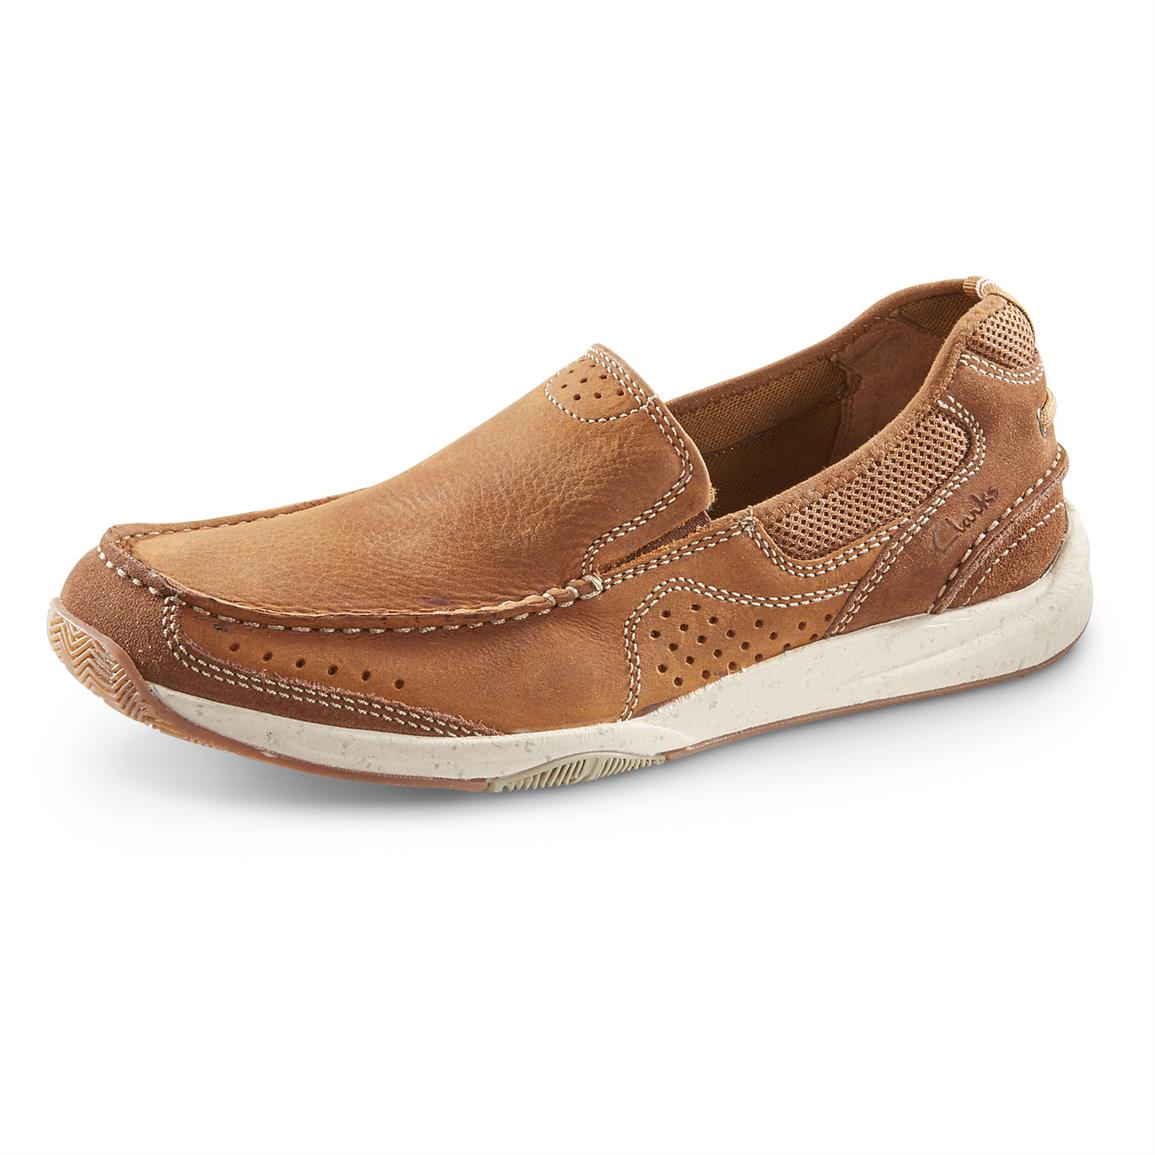 Clarks Allston Free Slip-On Shoes - 658061, Casual Shoes at Sportsman's ...